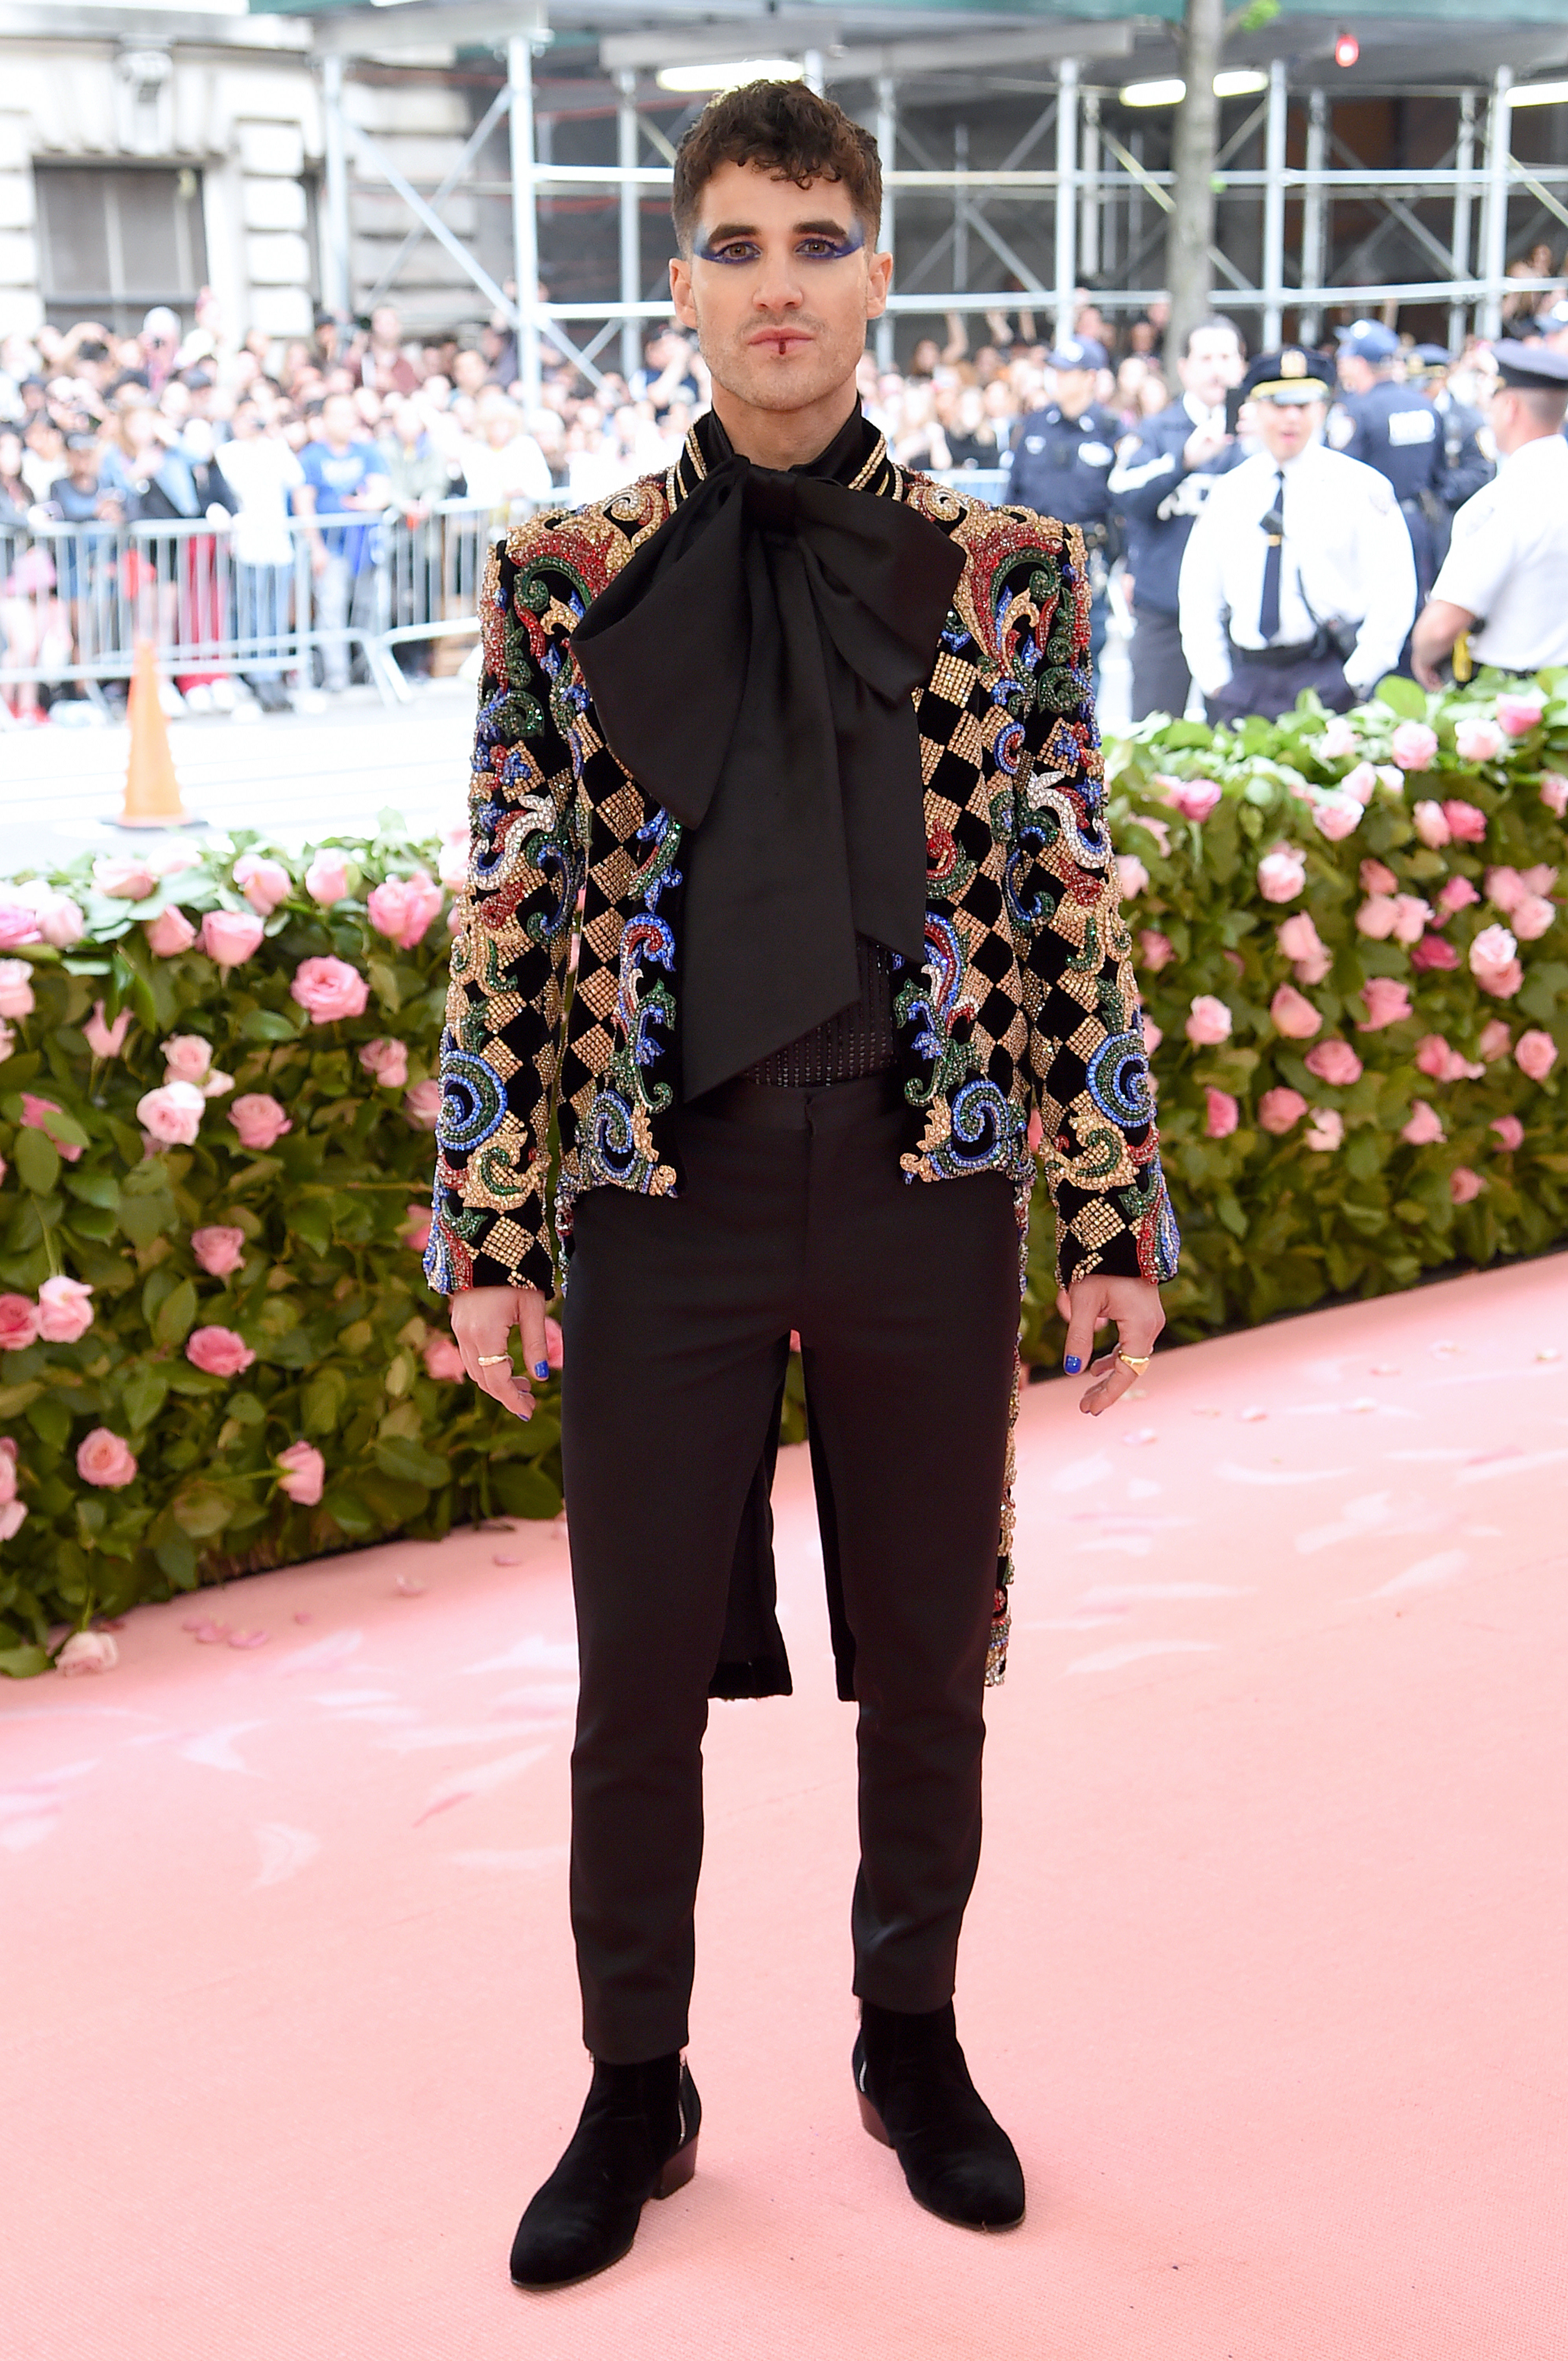 NEW YORK, NEW YORK - MAY 06: Darren Criss attends The 2019 Met Gala Celebrating Camp: Notes on Fashion at Metropolitan Museum of Art on May 06, 2019 in New York City. (Photo by Jamie McCarthy/Getty Images)